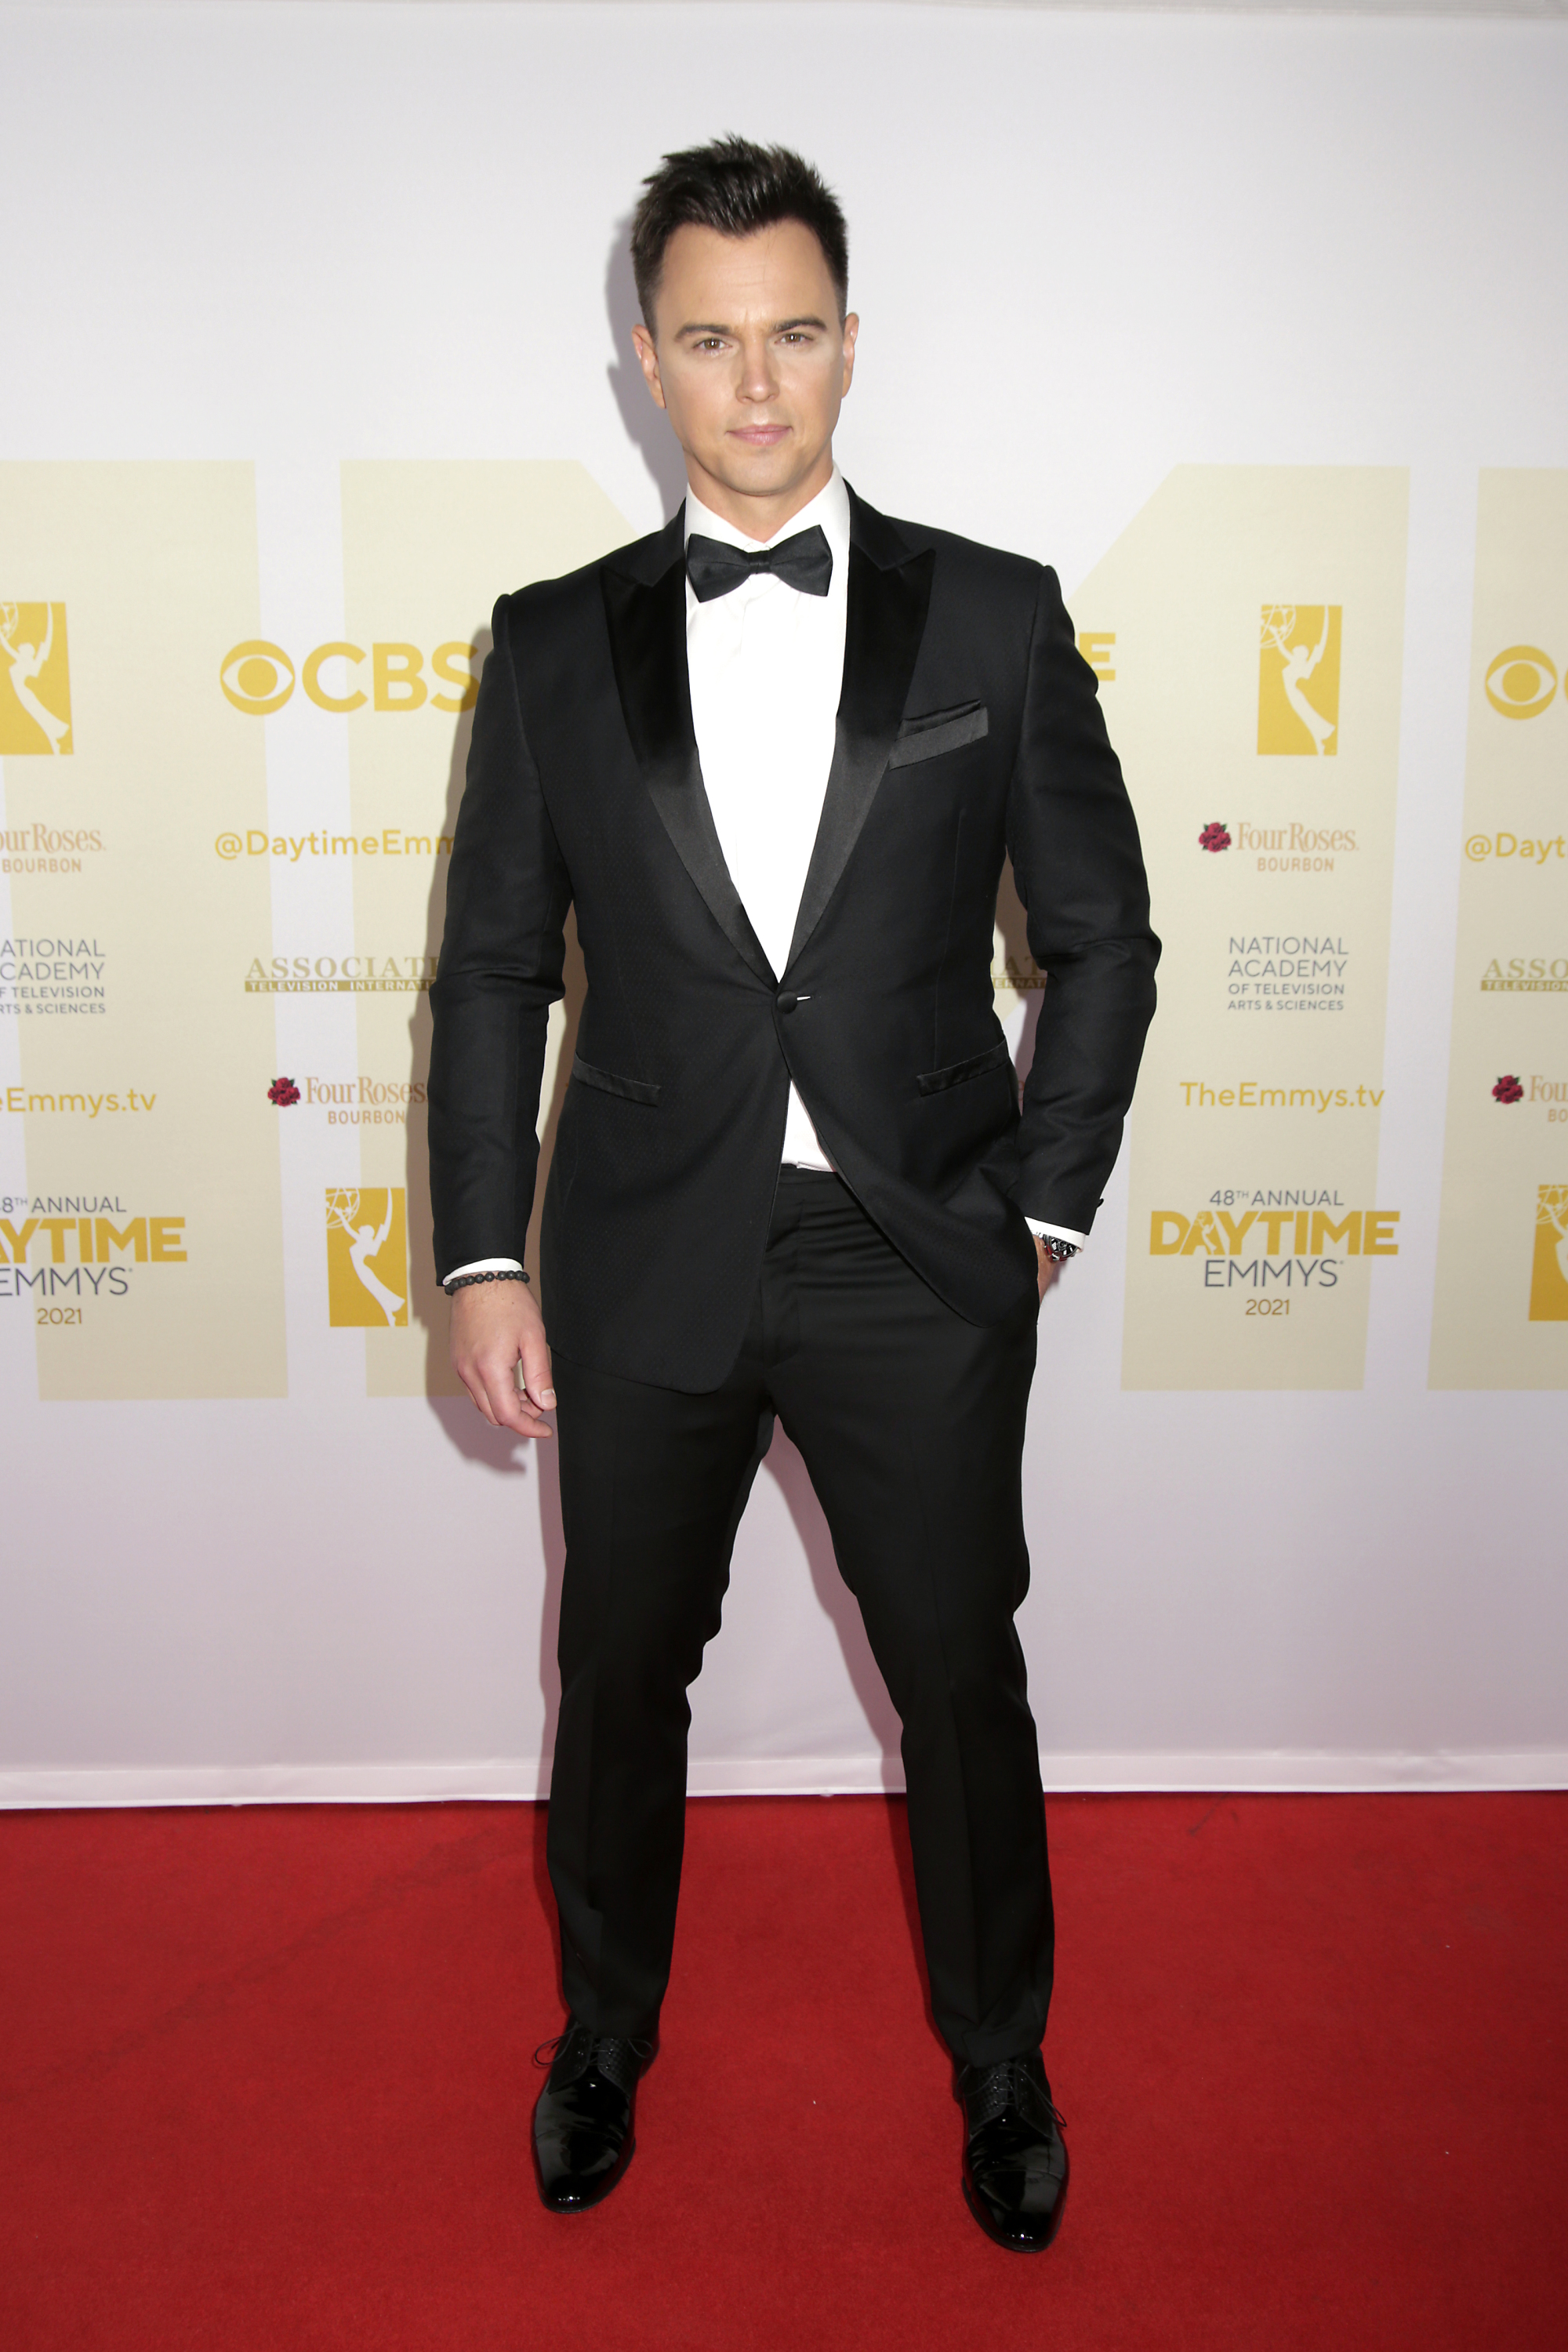 Darin earned multiple Emmy nominations for his role as Wyatt on The Bold and the Beautiful